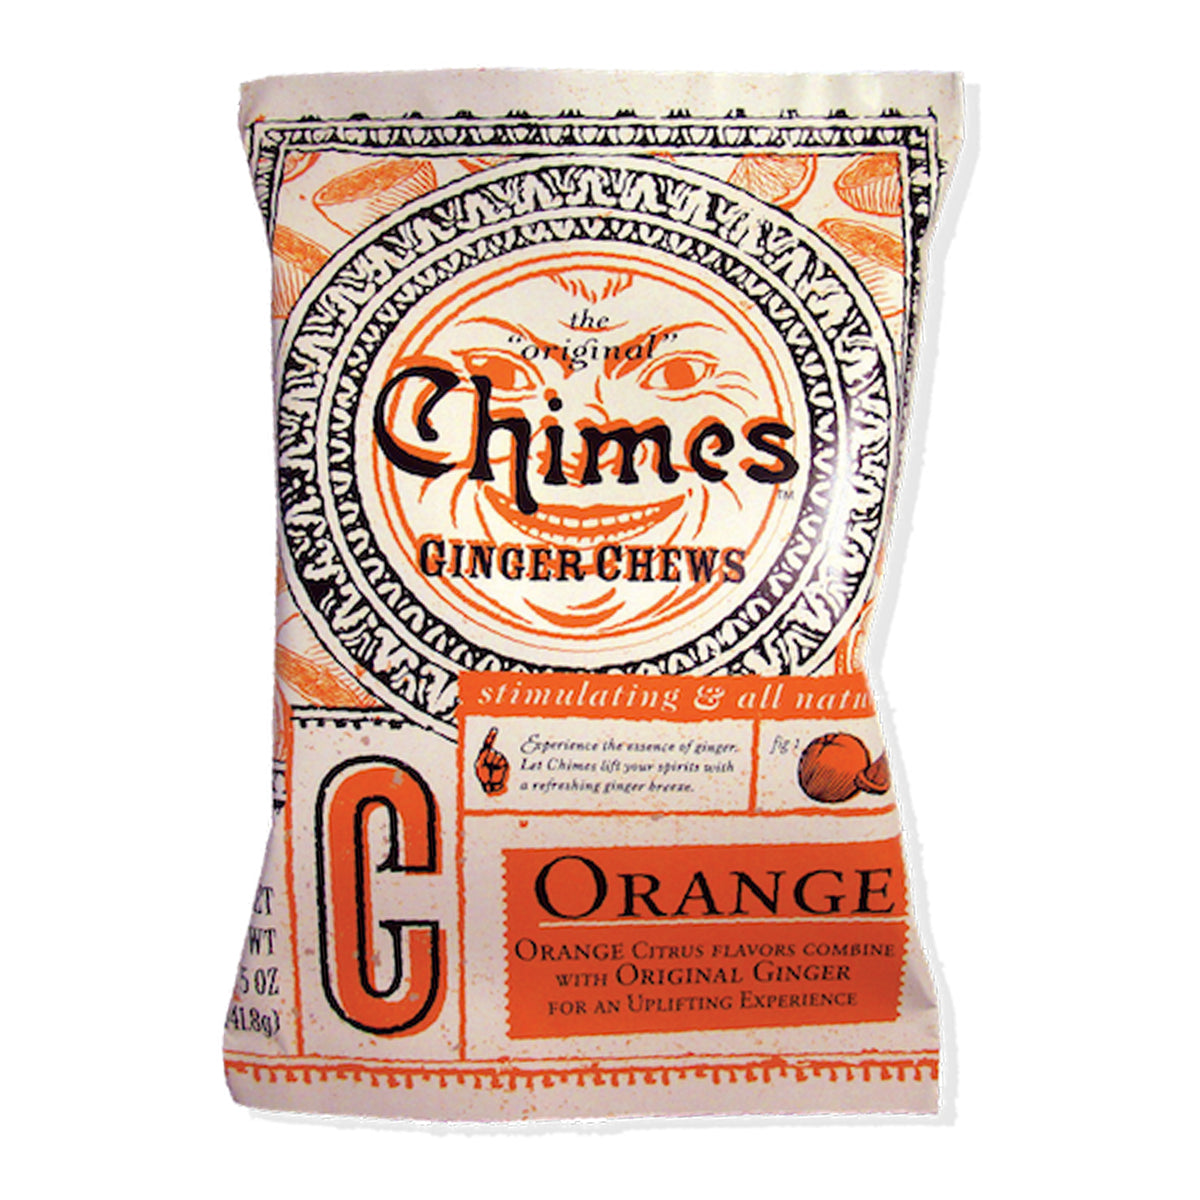 Chimes Chewy Ginger Candy - Orange flavor (141.8g)